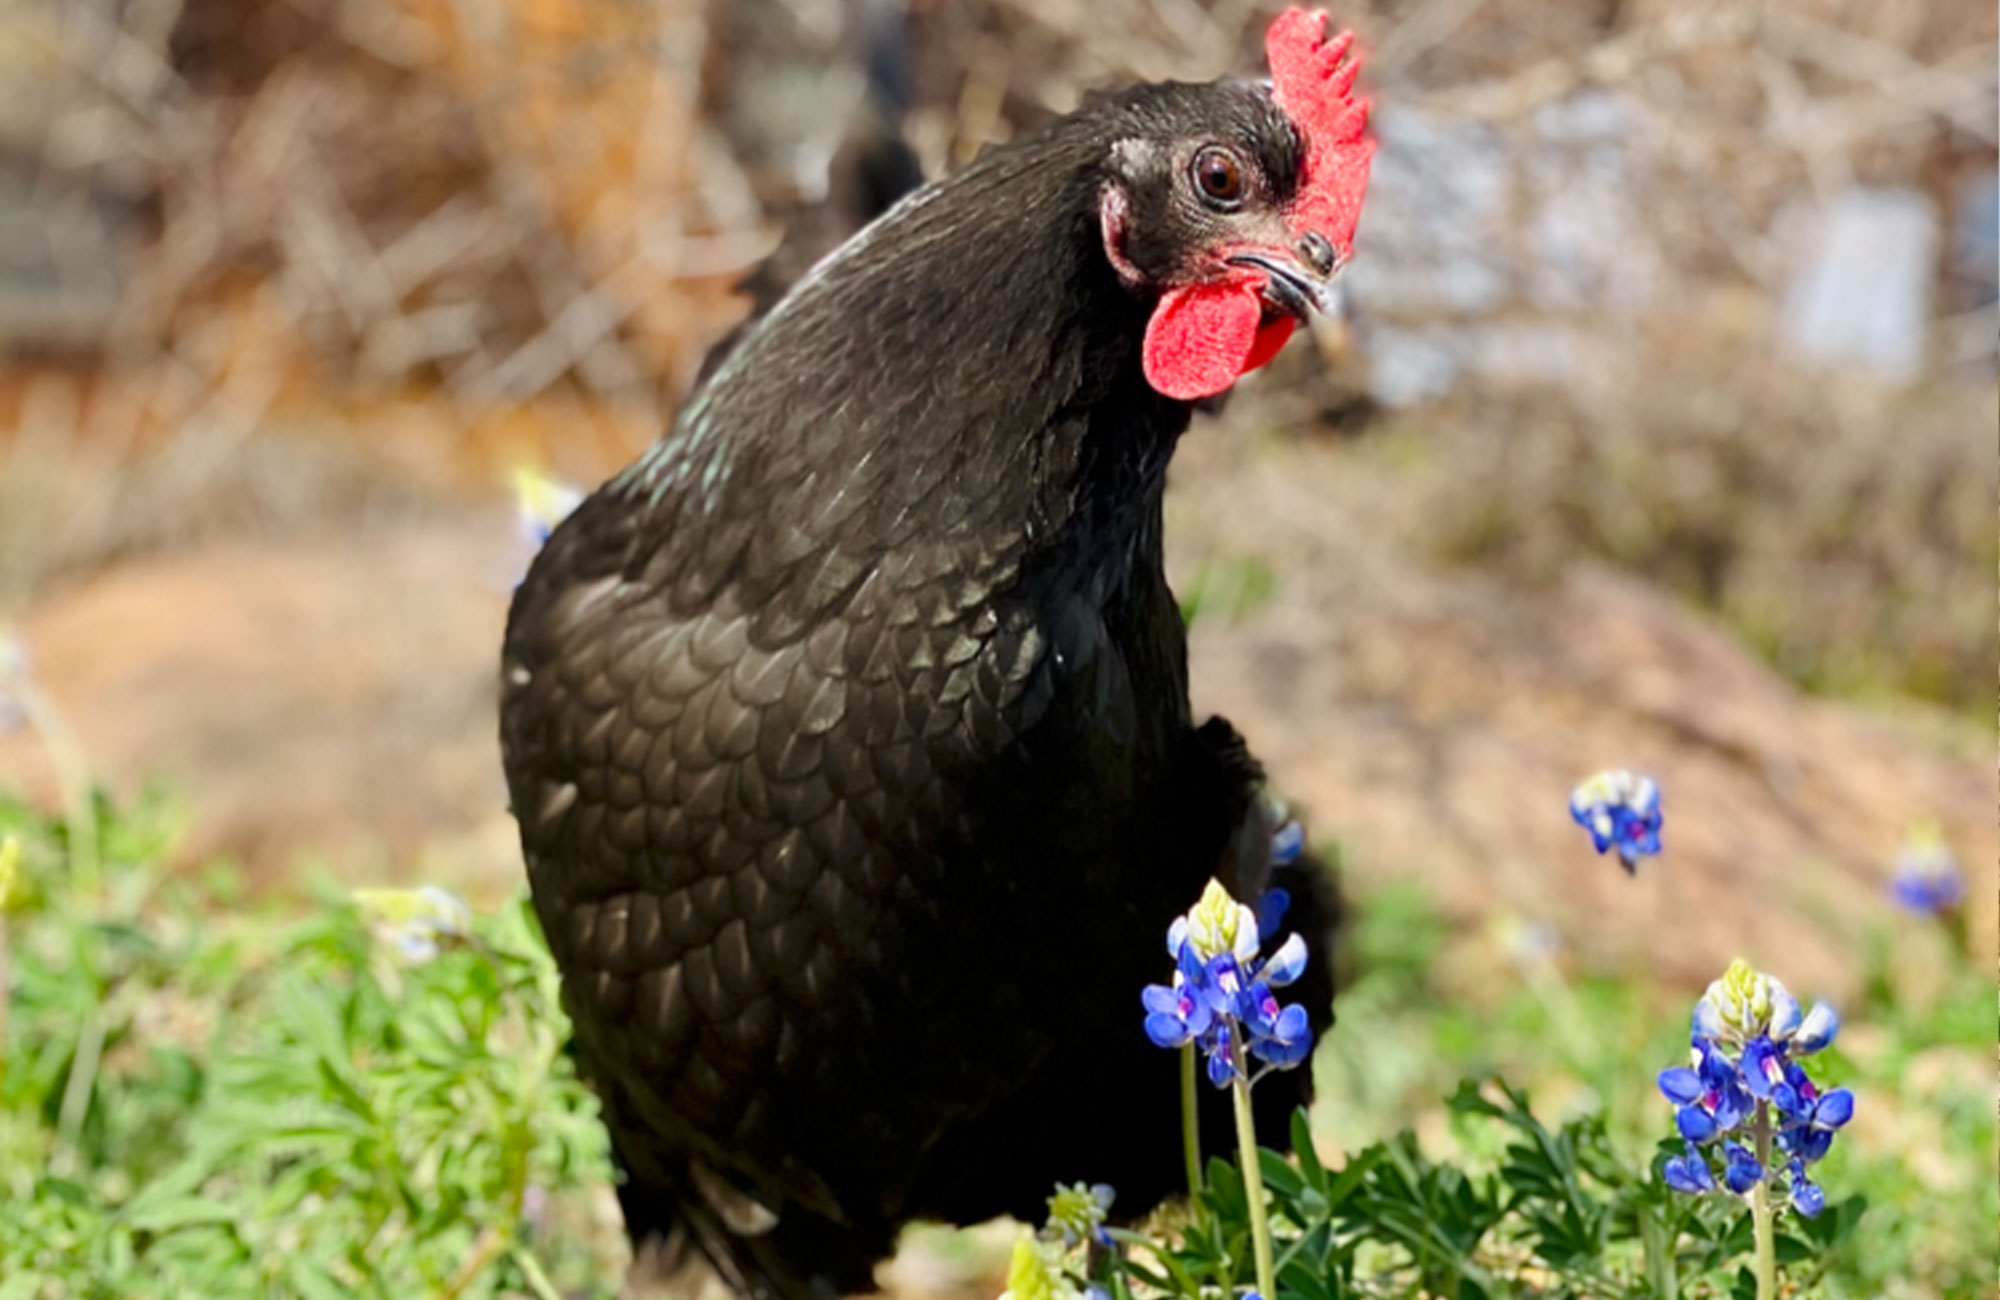 Chicken Greeters Among the Bluebonnets